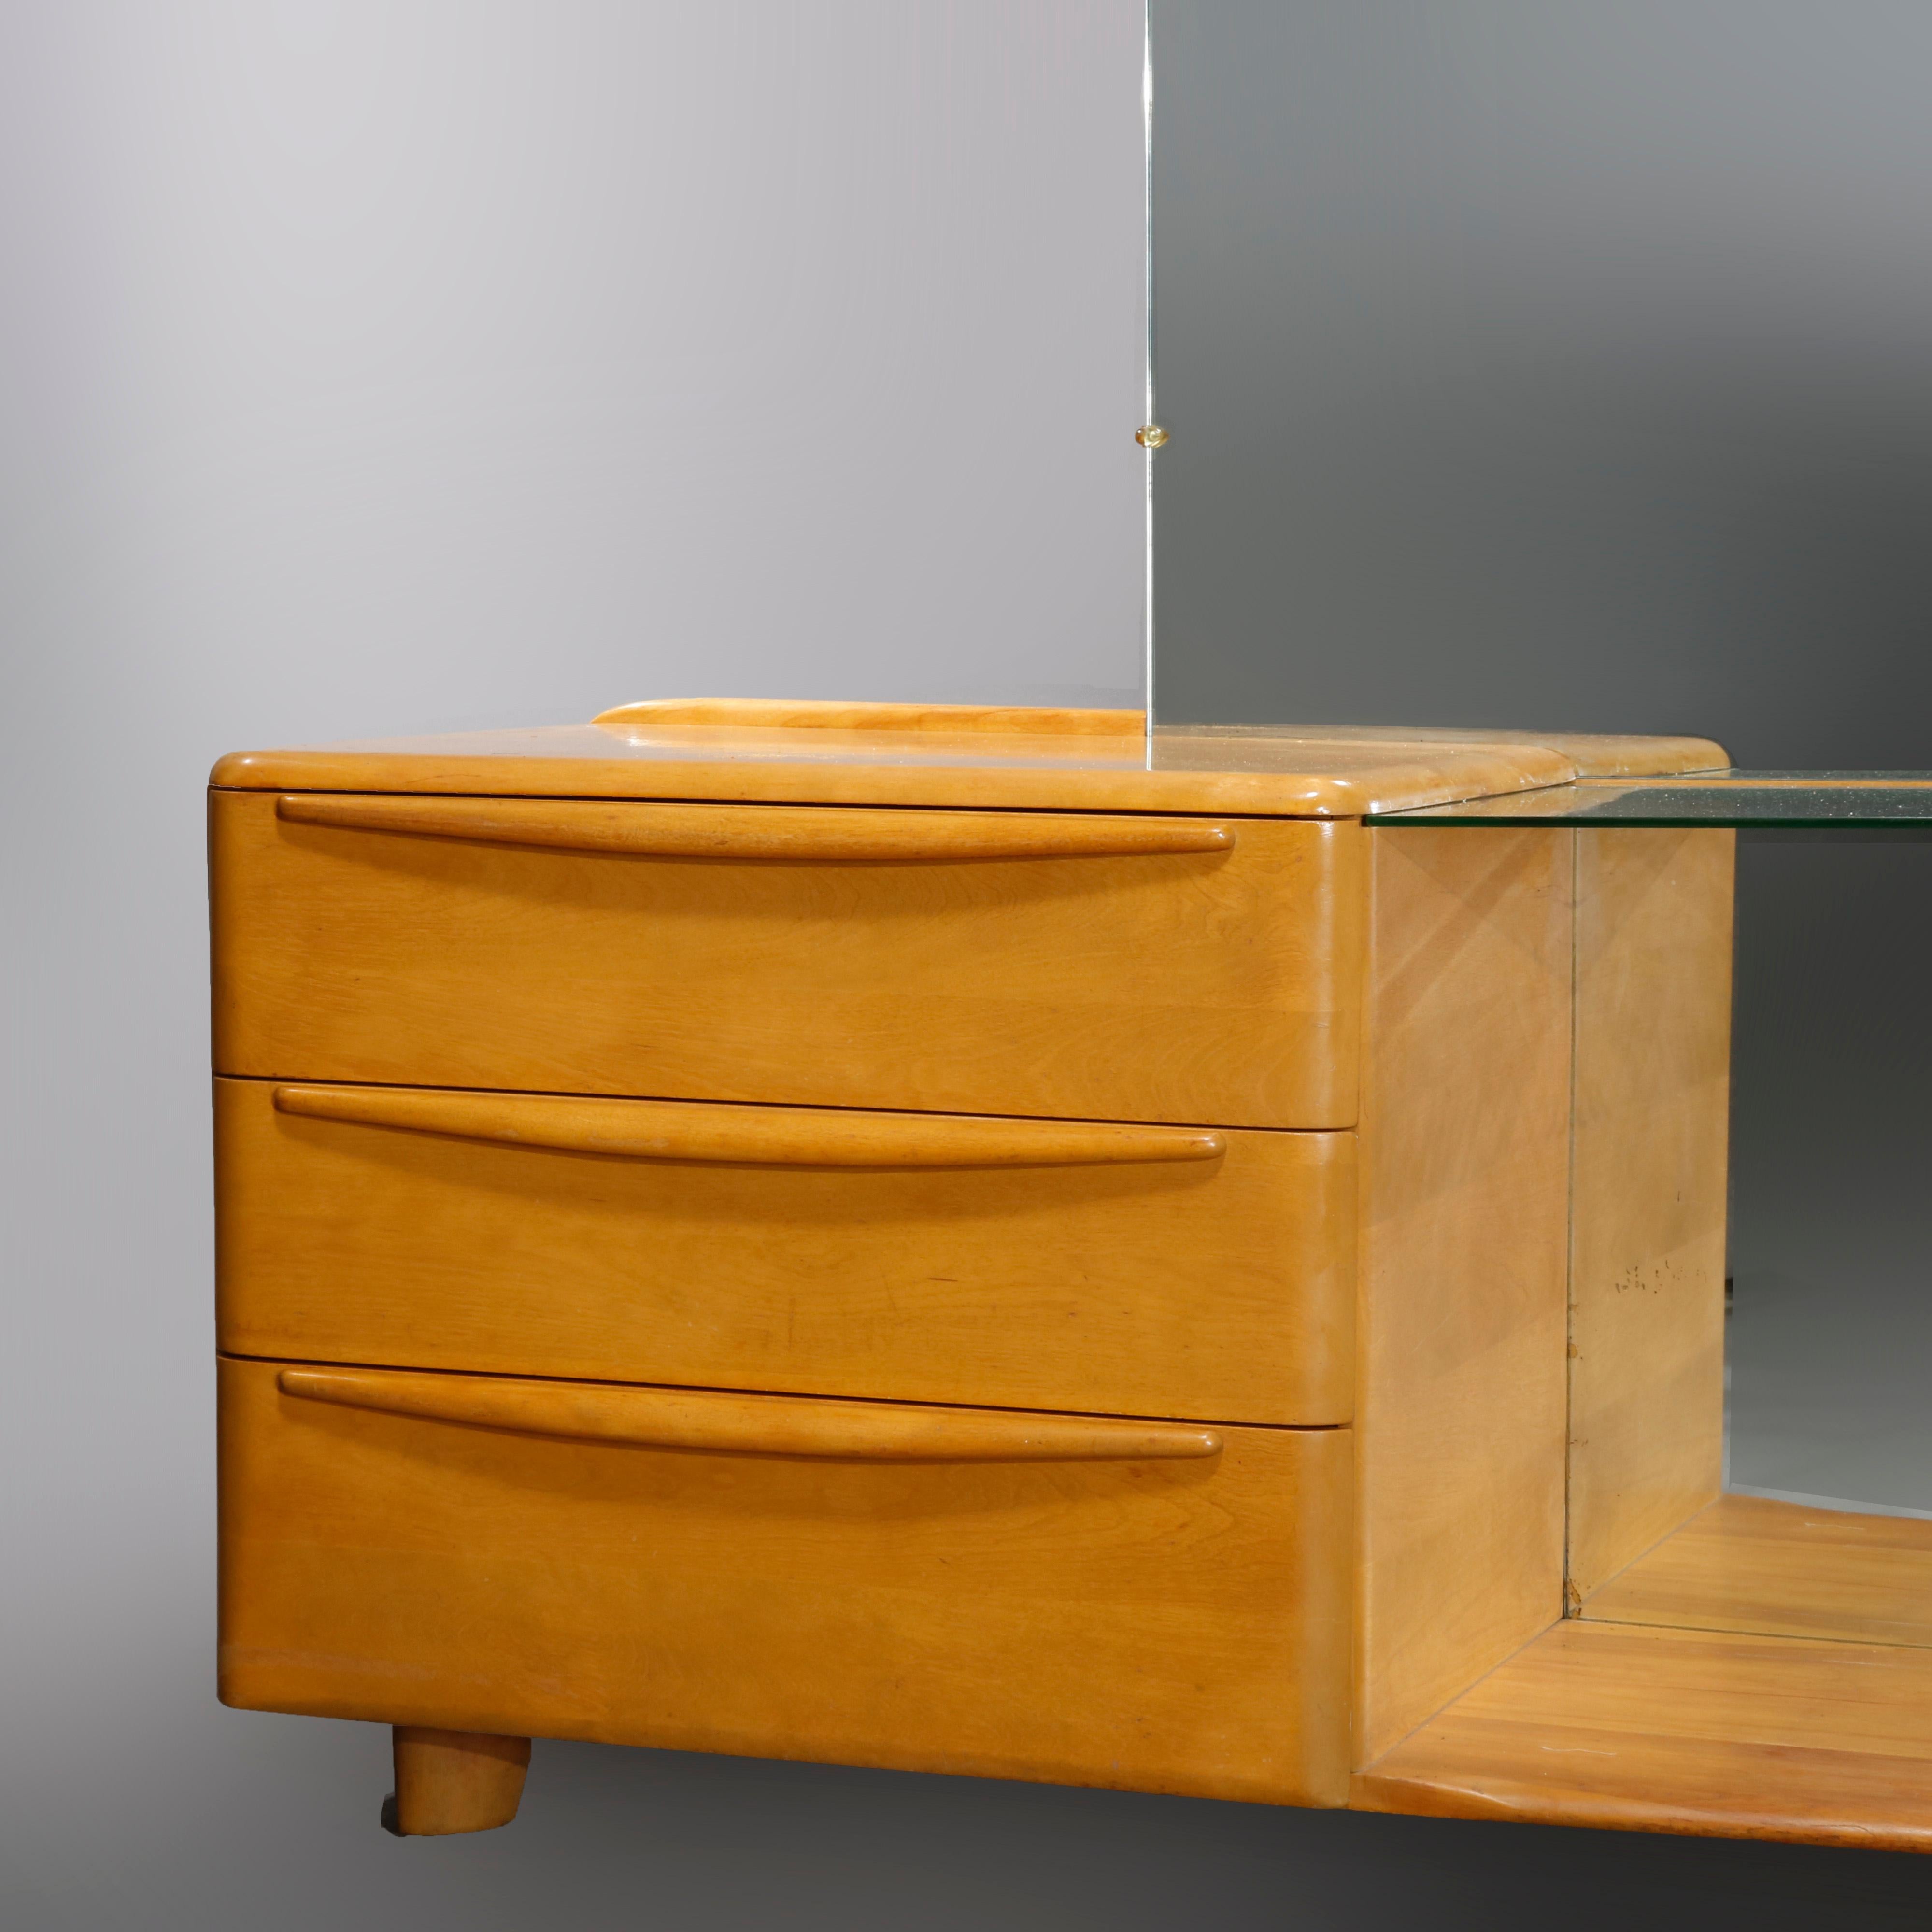 Glass Mid-Century Modern Heywood Wakefield Encore Dressing Table in Wheat Finish, 1952